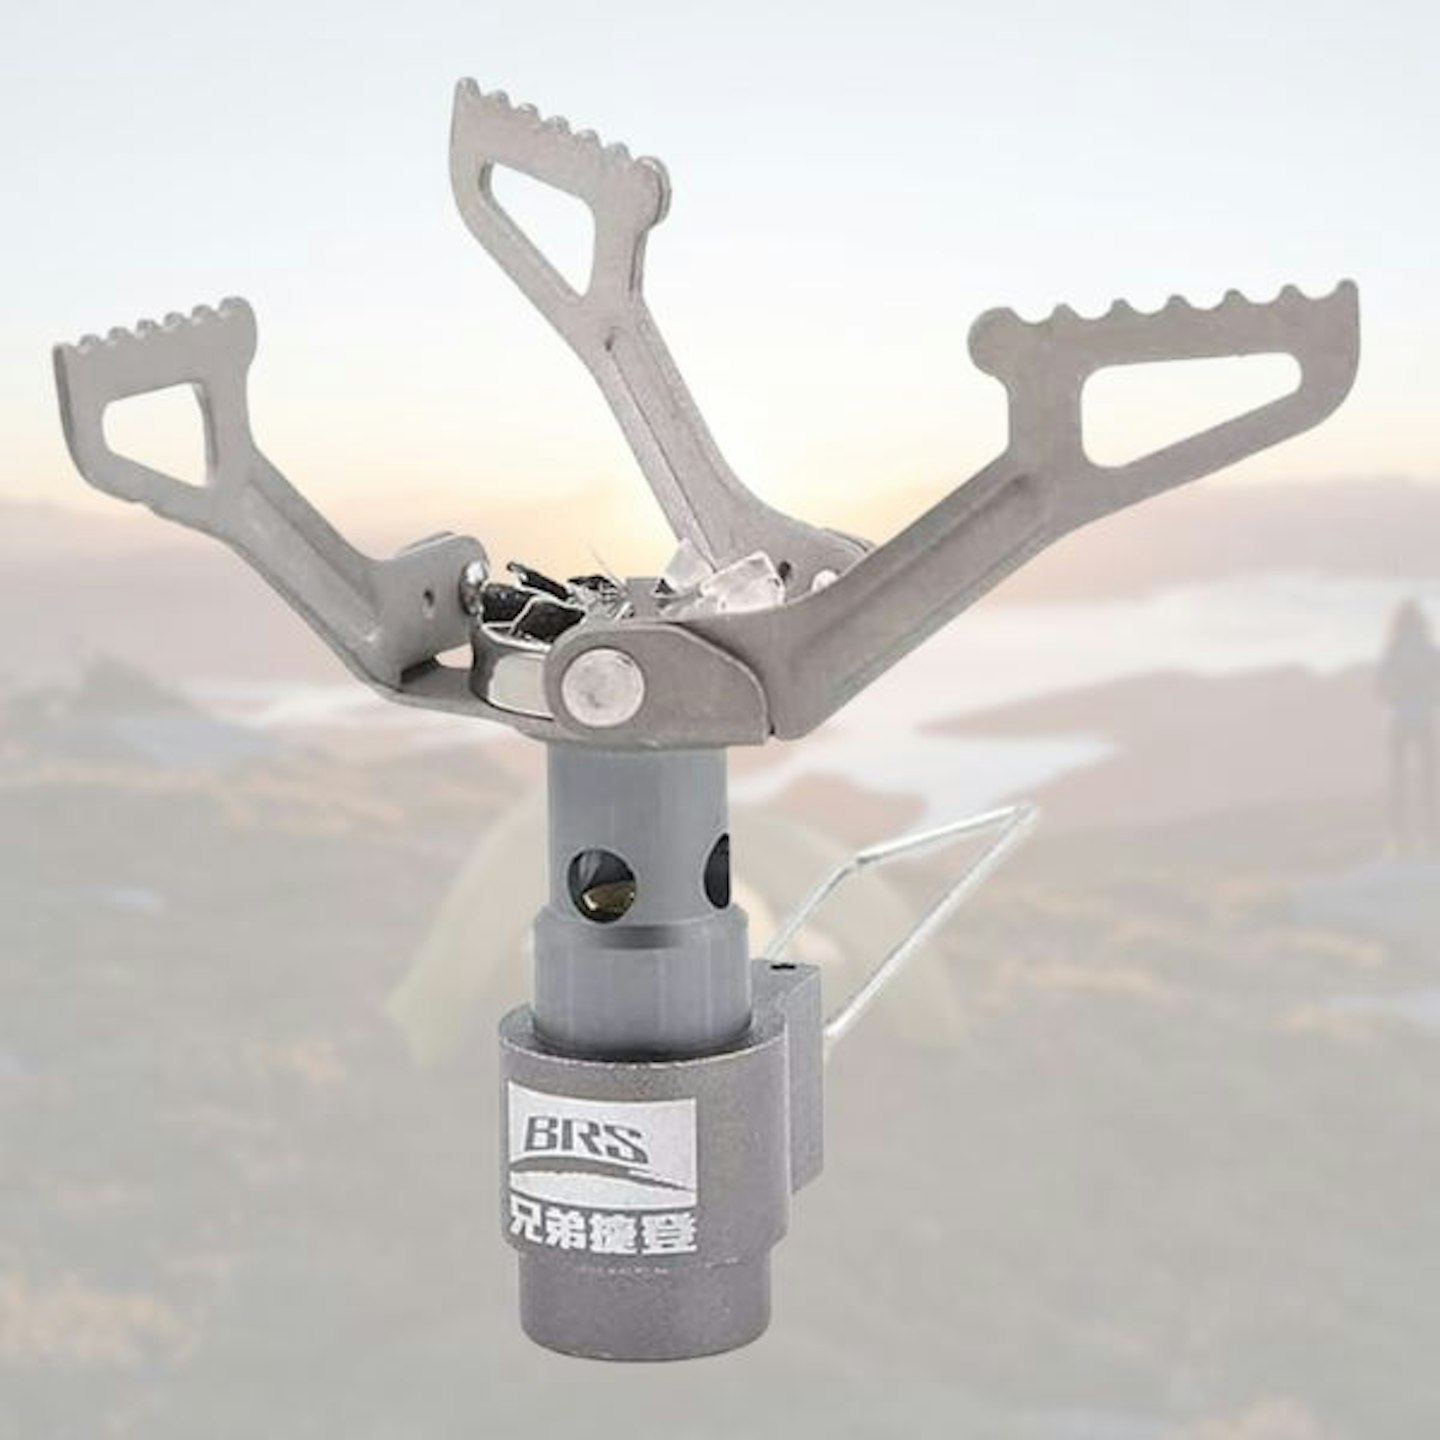 BRS-3000T camping stove